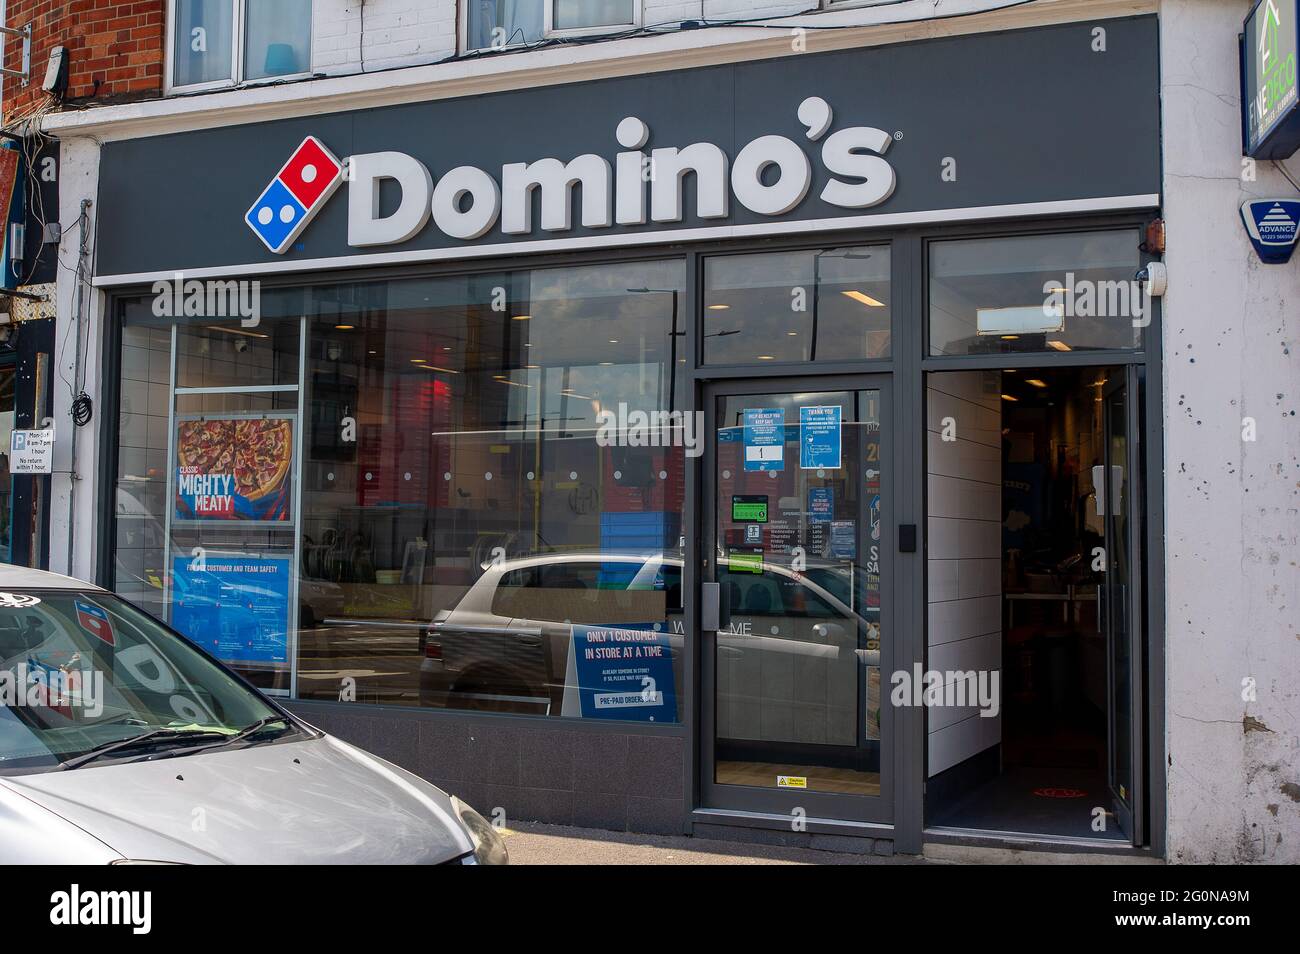 Slough, Berkshire, UK. 2nd June, 2021. Domino's Pizza are reported to be looking to recruit 5,000 chefs and drivers as the demand for take away pizzas continues to soar after the Covid-19 lockdowns. Domino's have 1,200 outlets in the UK. Domino's are also offering 1,400 jobs as part of the Government's Kickstart Scheme. Credit: Maureen McLean/Alamy Stock Photo